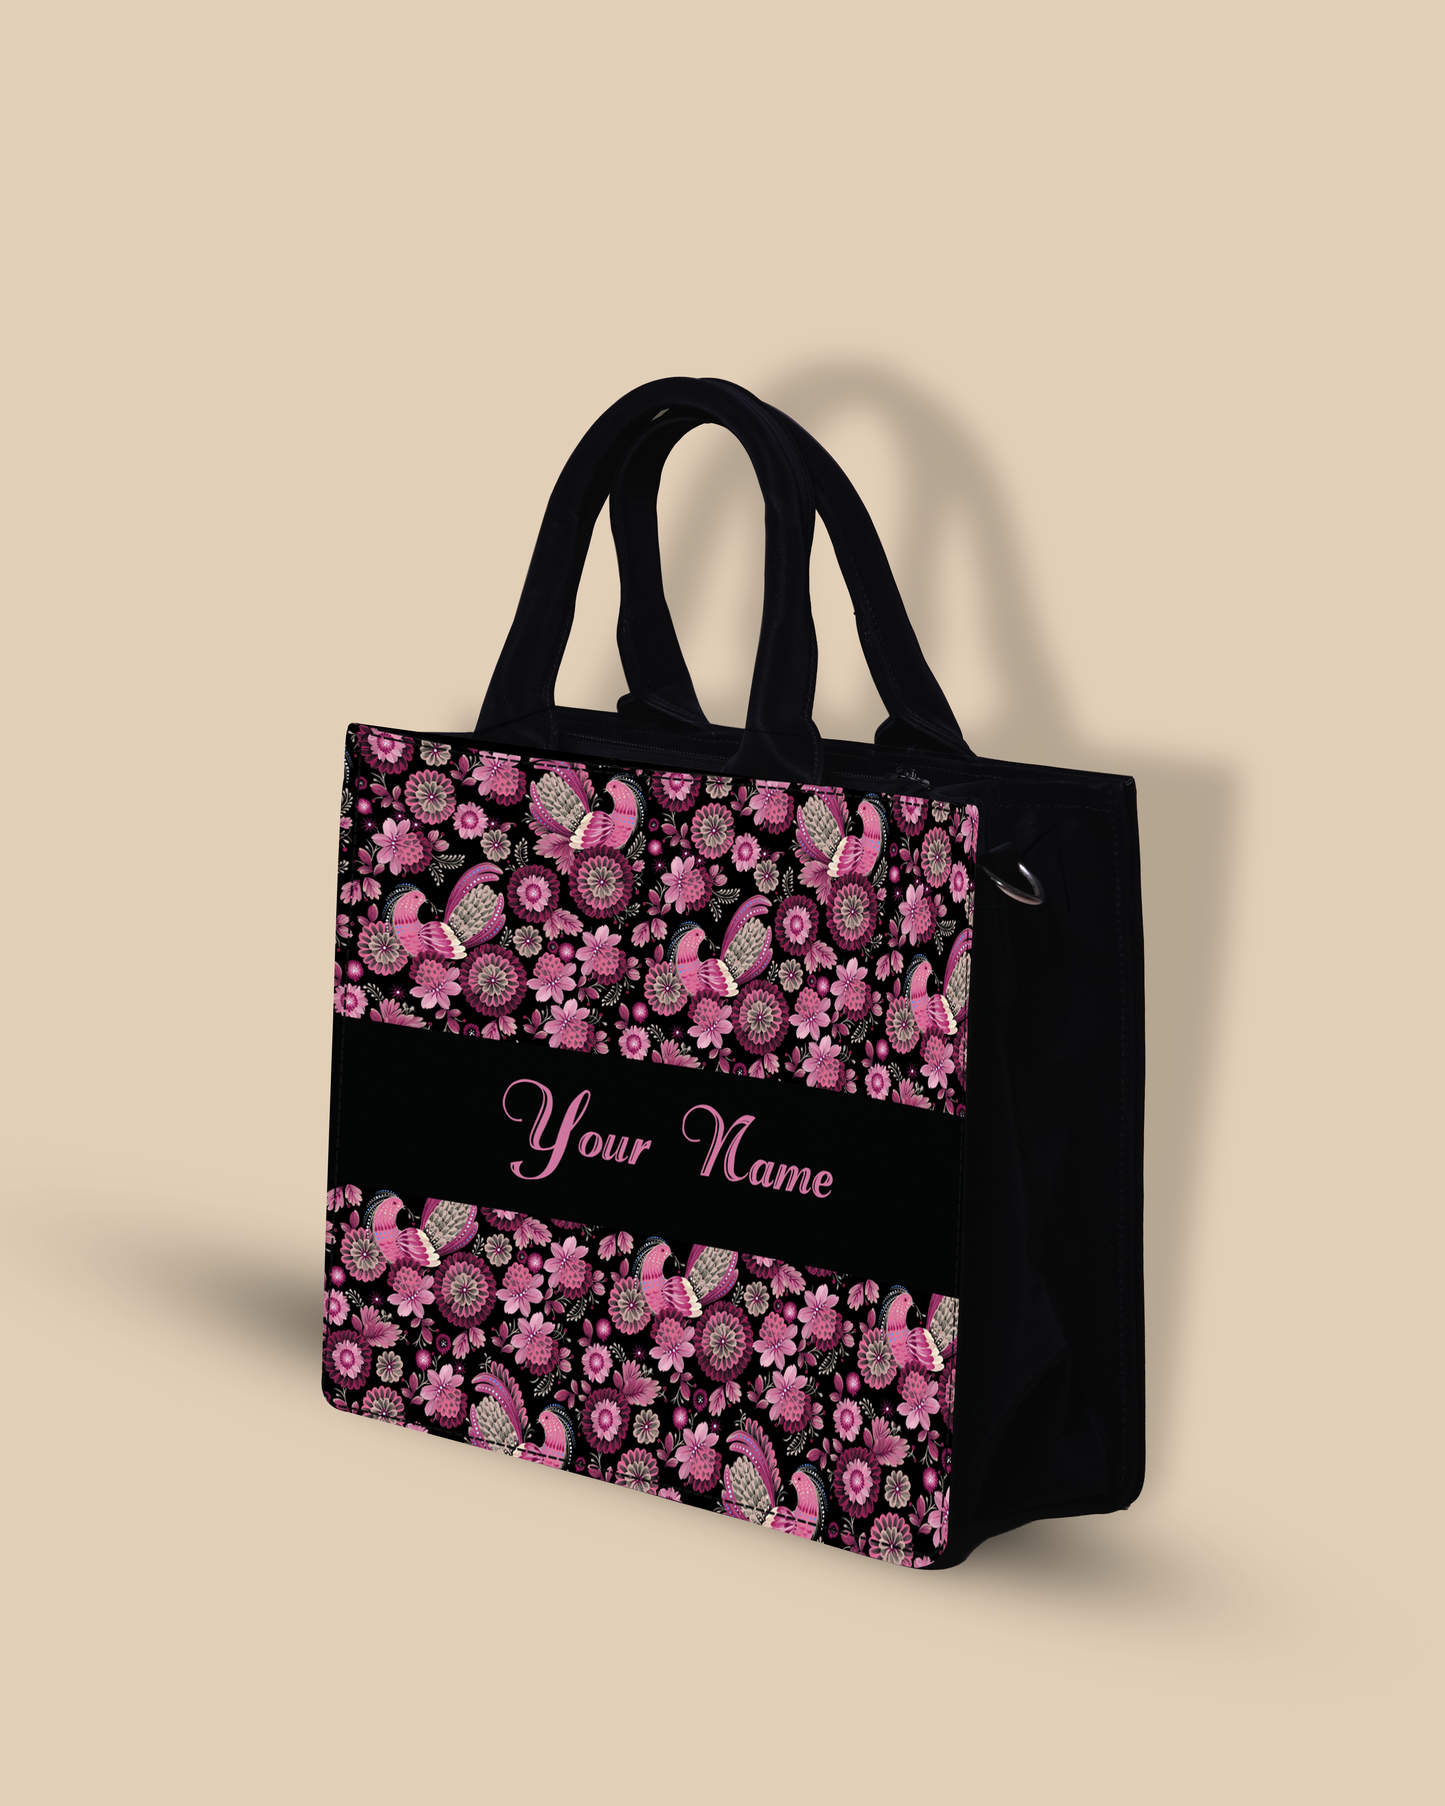 Customized small Tote Bag Designed With Calligraphic Flowers And Peacock Pattern